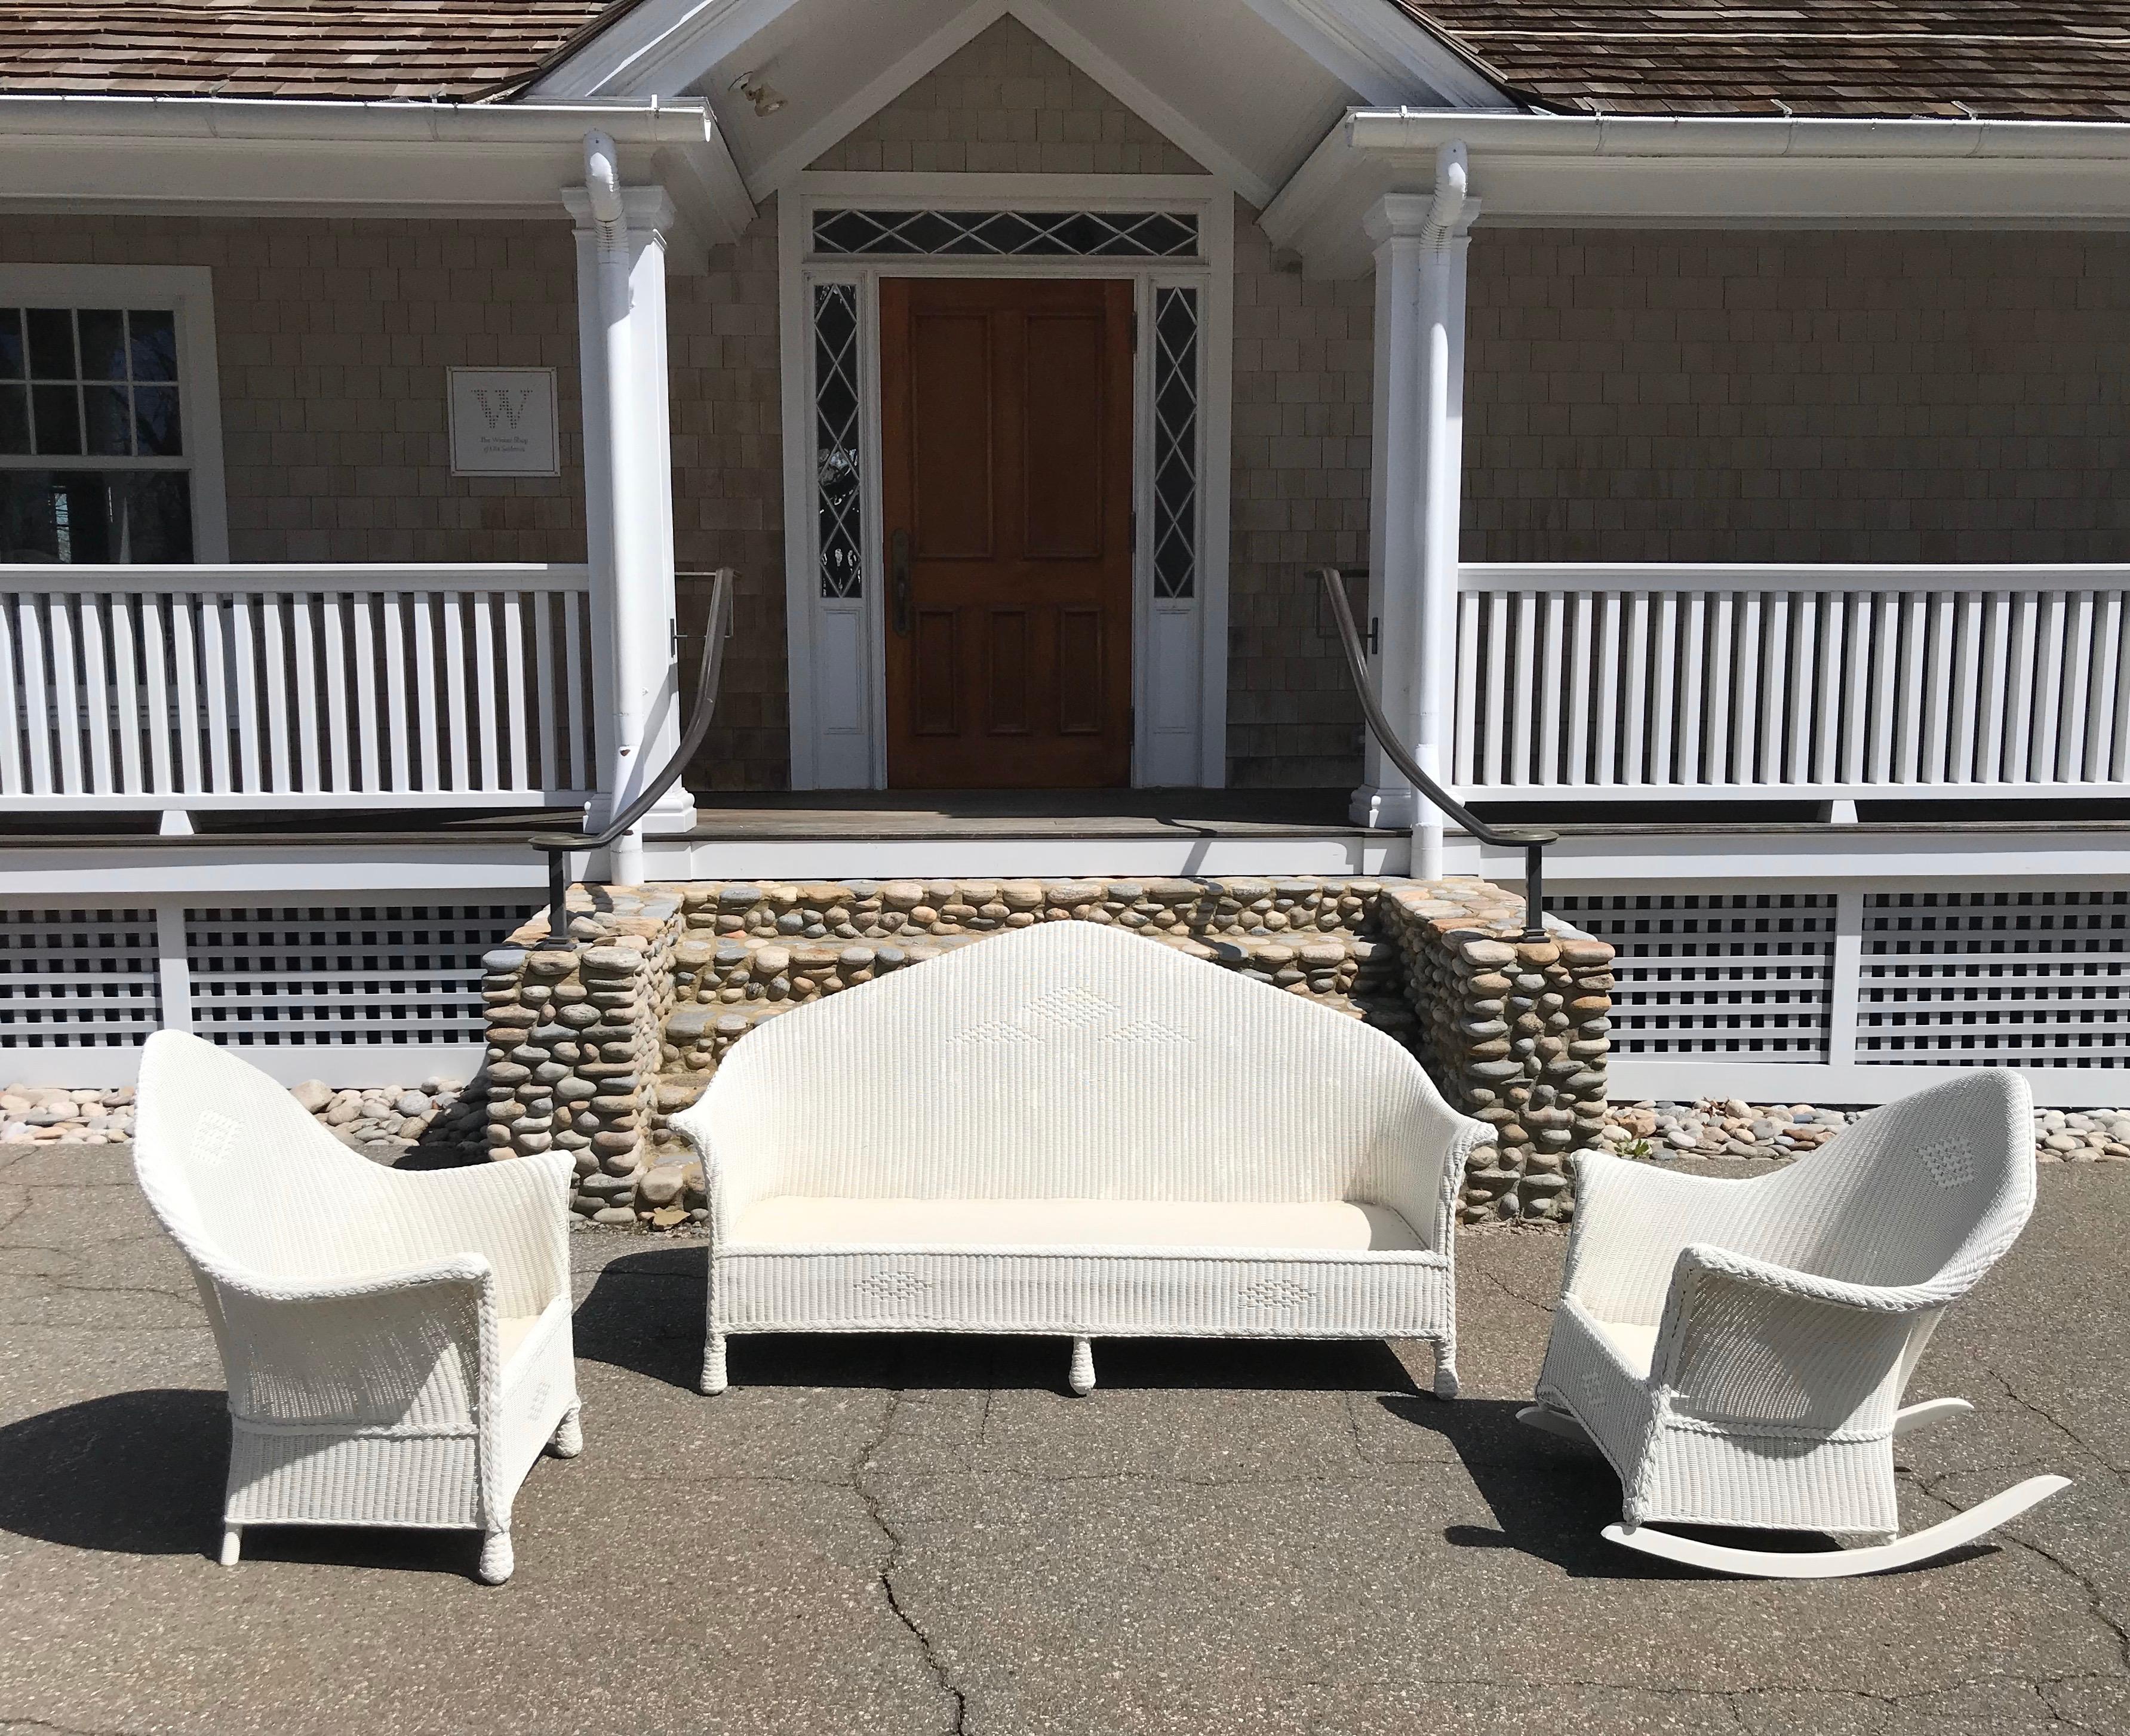 Three-piece antique wicker Lloyd Loom set in fresh white paint. White fabric covers spring seat platform. Sofa measures 70” wide, 36” tall, 31” deep with seat platform of 13”. Chair measures 35” tall, 30” wide, 26” deep with seat platform if 13”.